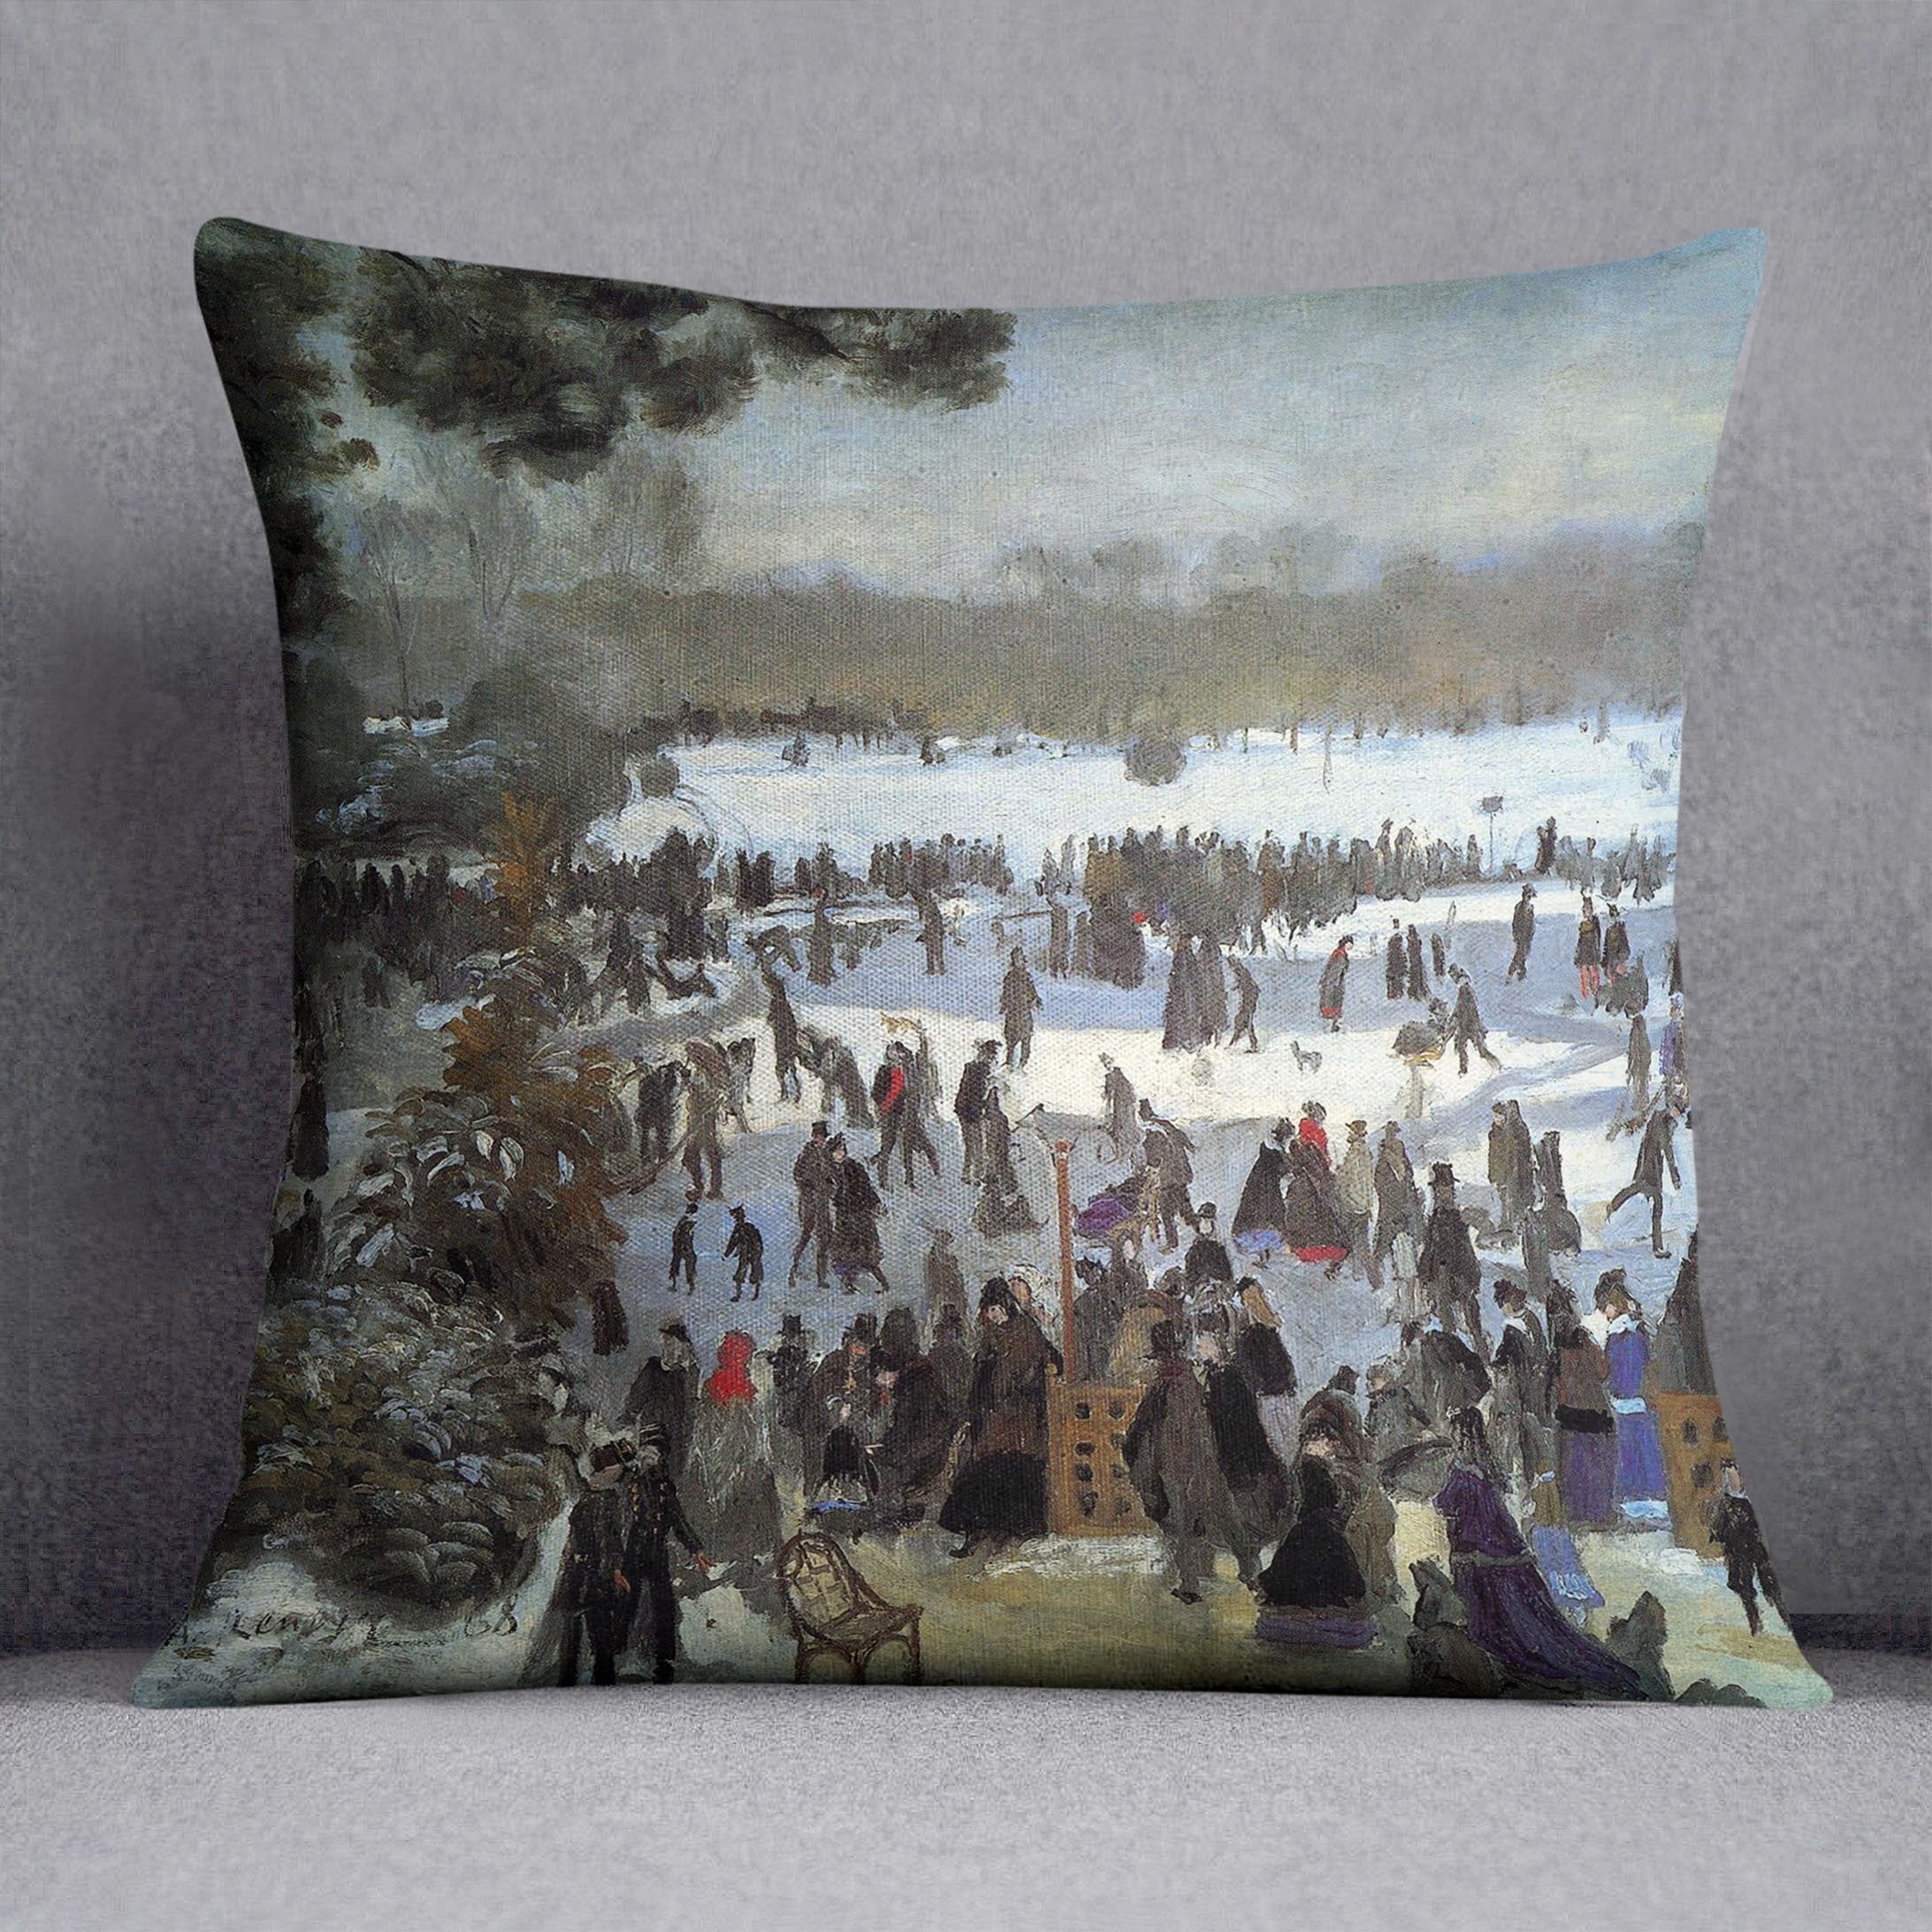 Skating runners in the Bois de Bologne by Renoir Throw Pillow